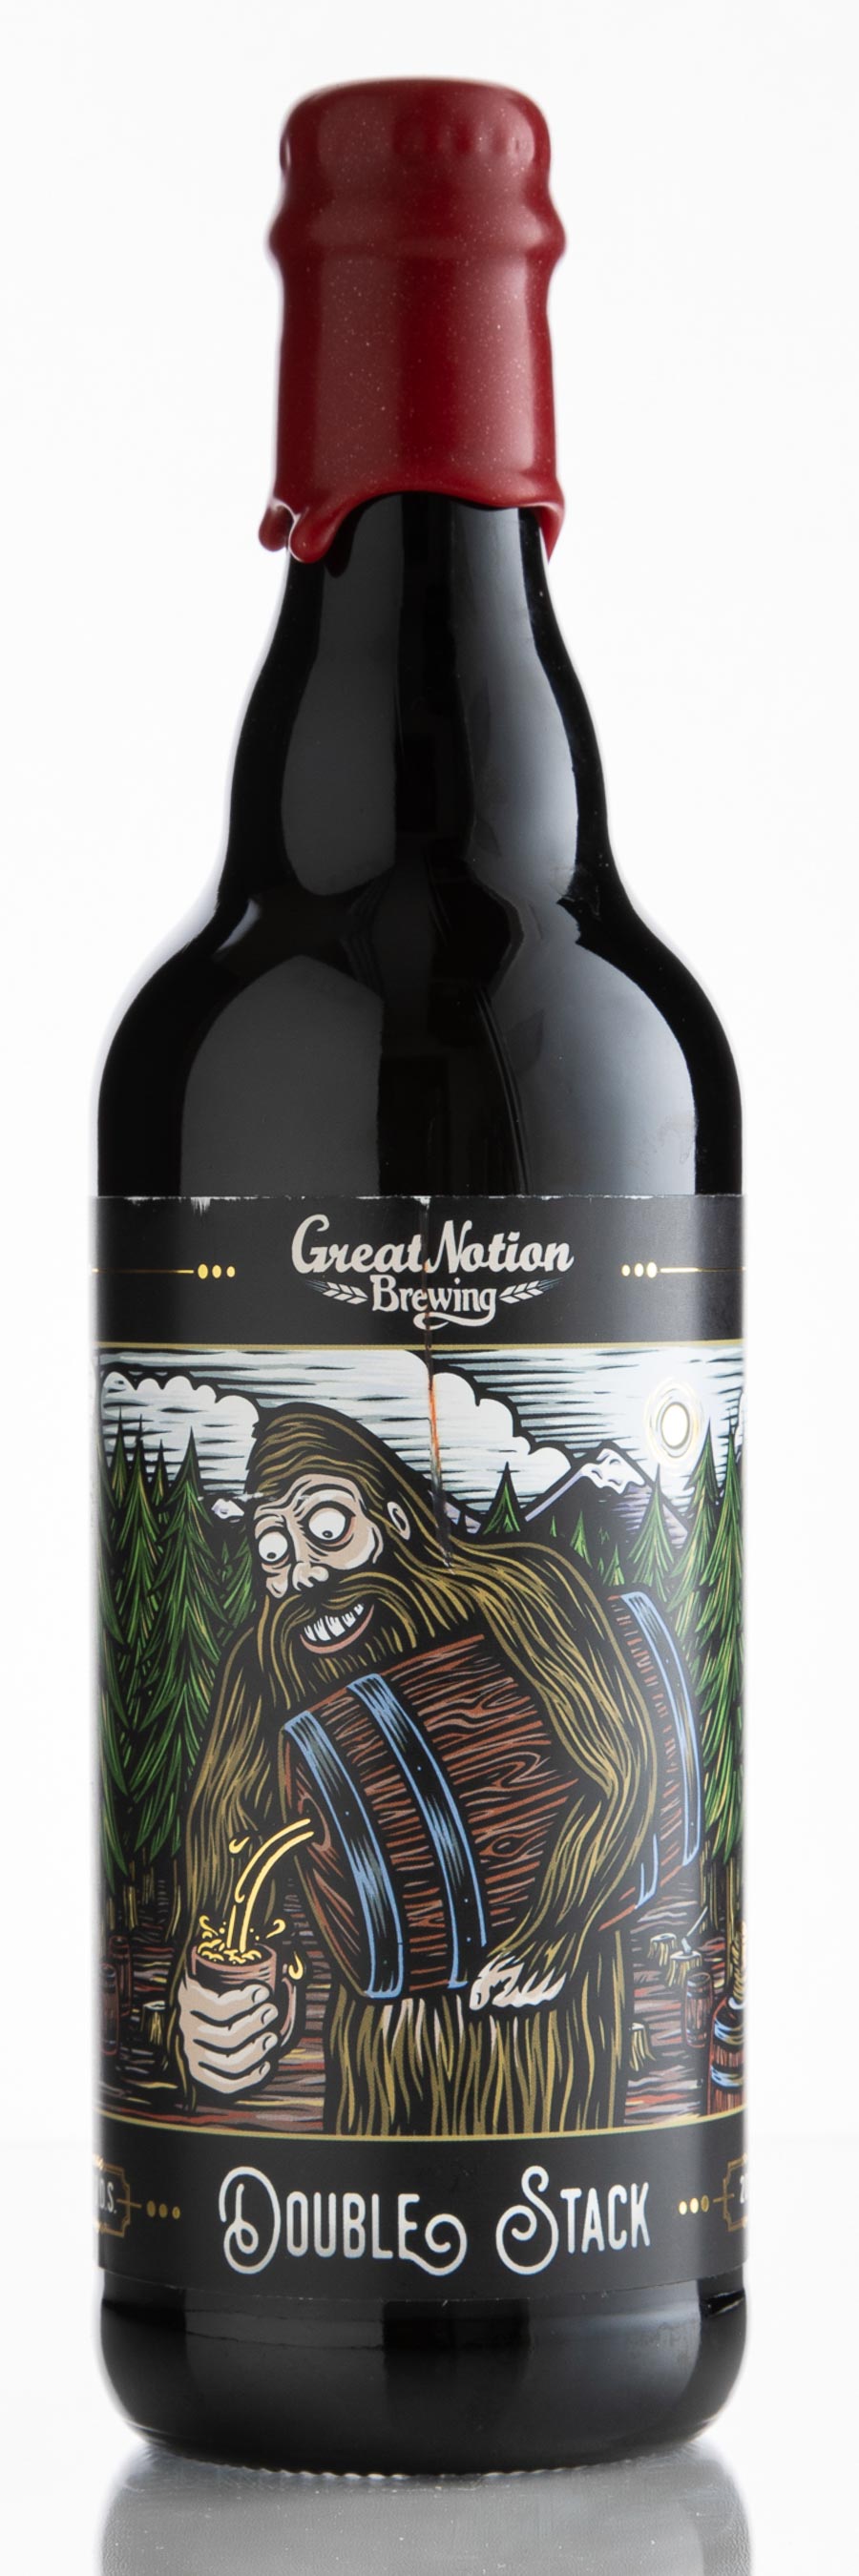 great notion beer glass